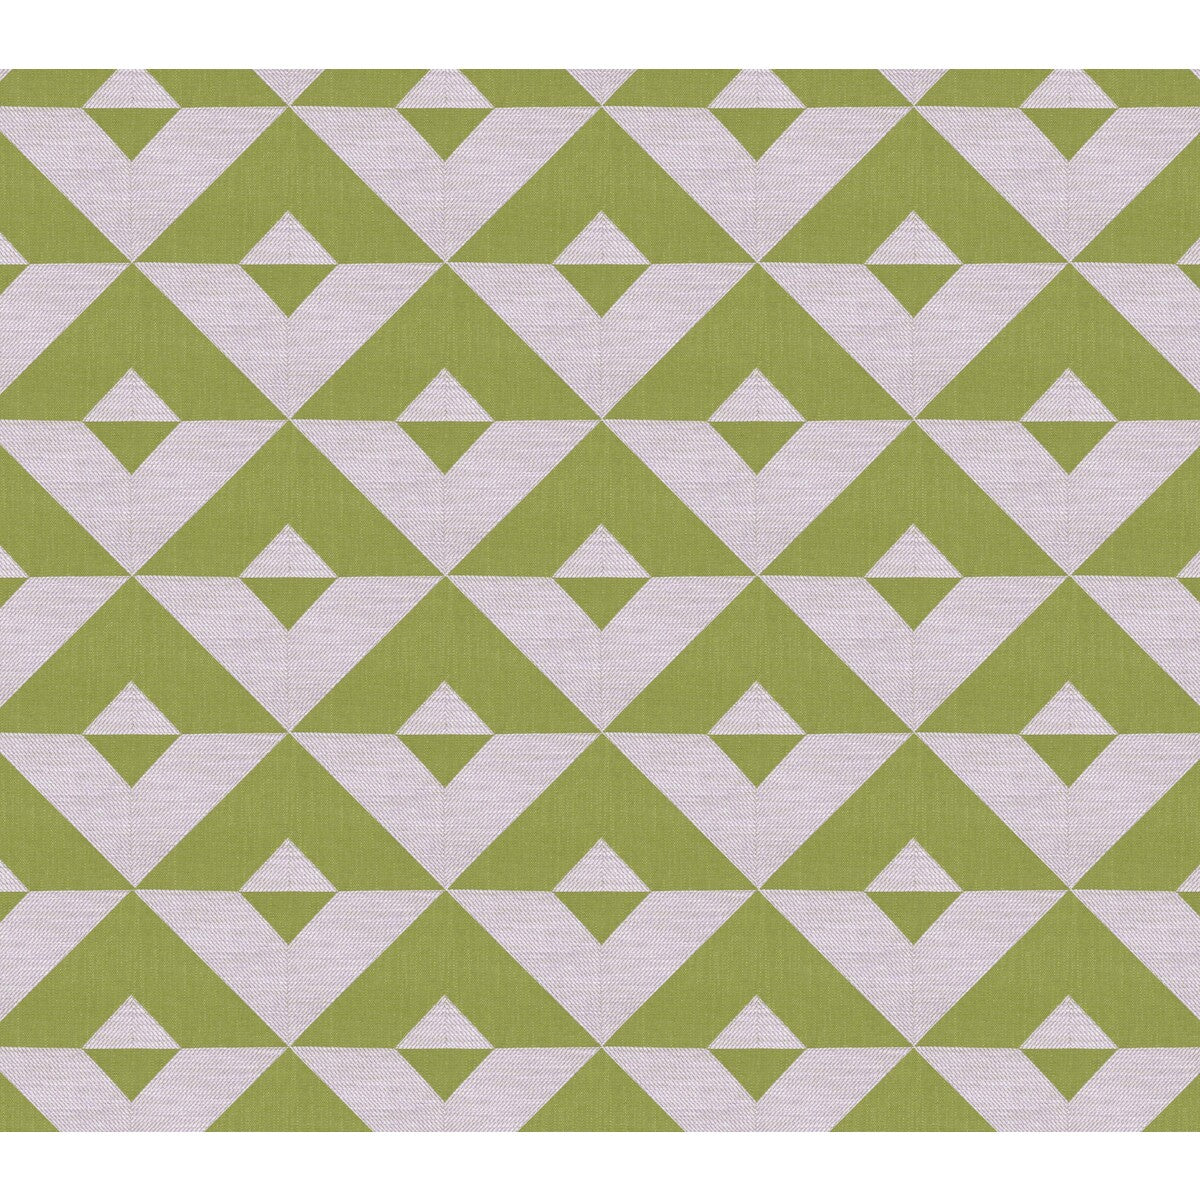 Kenia fabric in verde color - pattern GDT5373.4.0 - by Gaston y Daniela in the Gaston Africalia collection